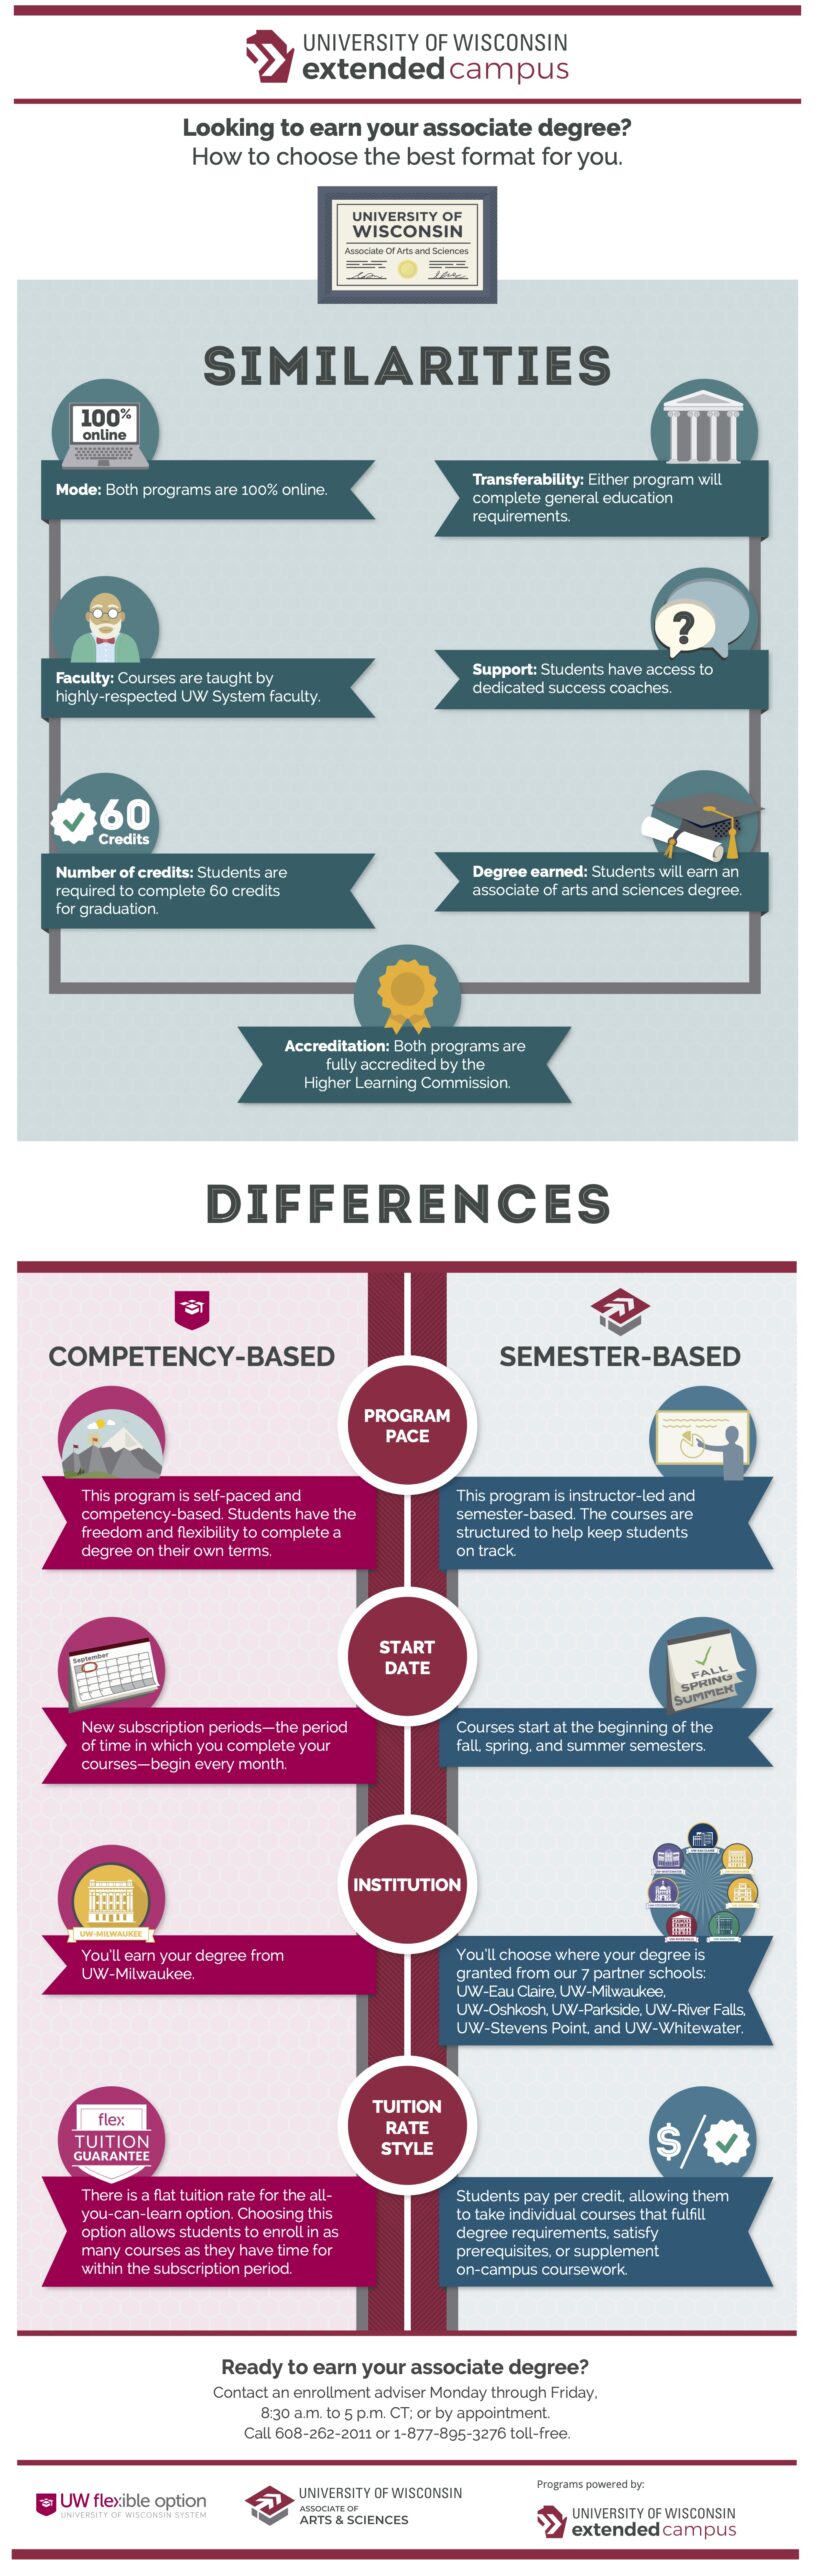 infographic explaining the differences and similarities between earning an associate degree from UW Flexible Option versus semester-based.